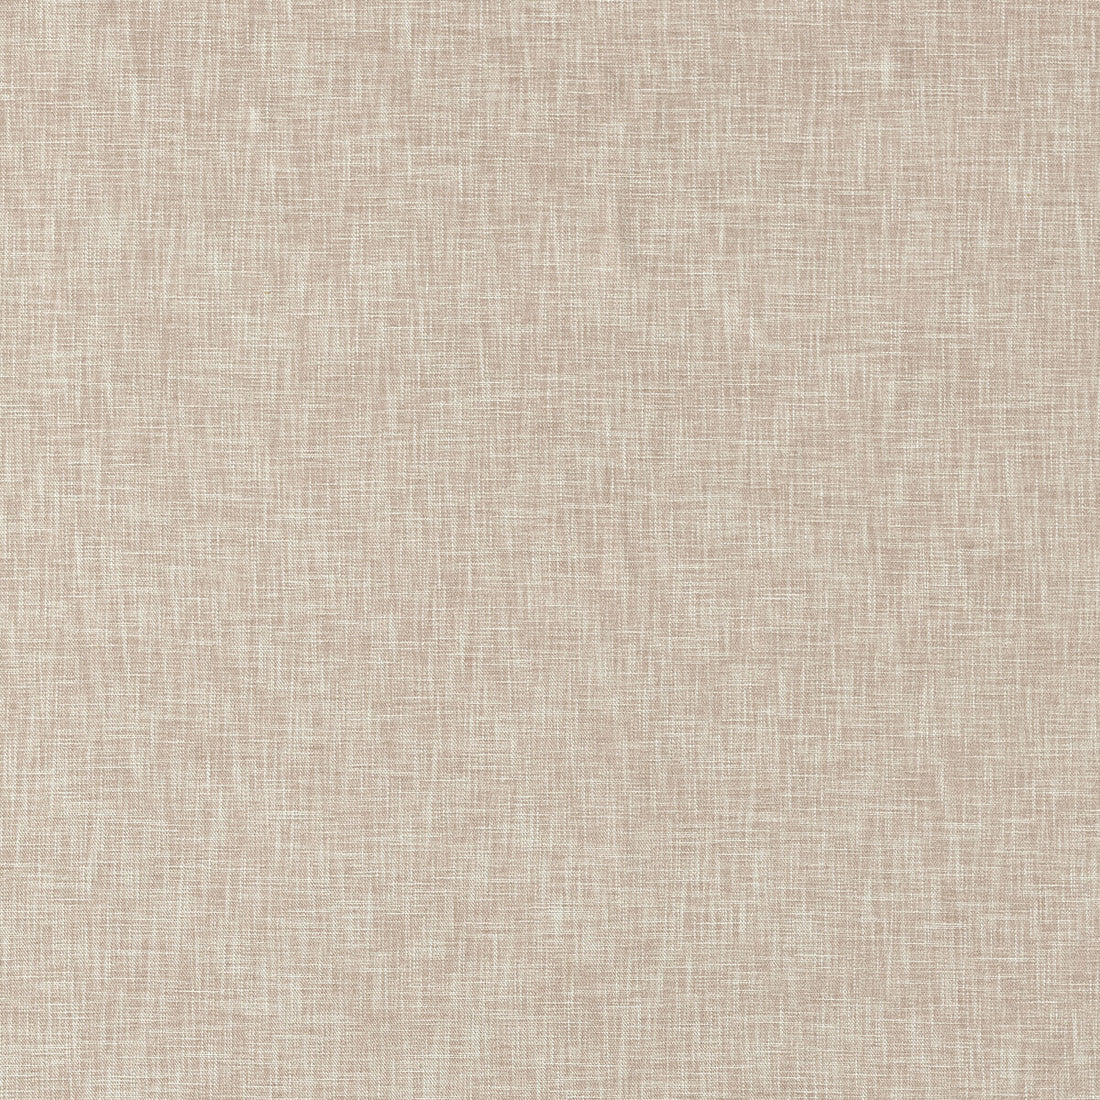 Gaia fabric in blush color - pattern F1528/02.CAC.0 - by Clarke And Clarke in the Clarke &amp; Clarke Eco collection